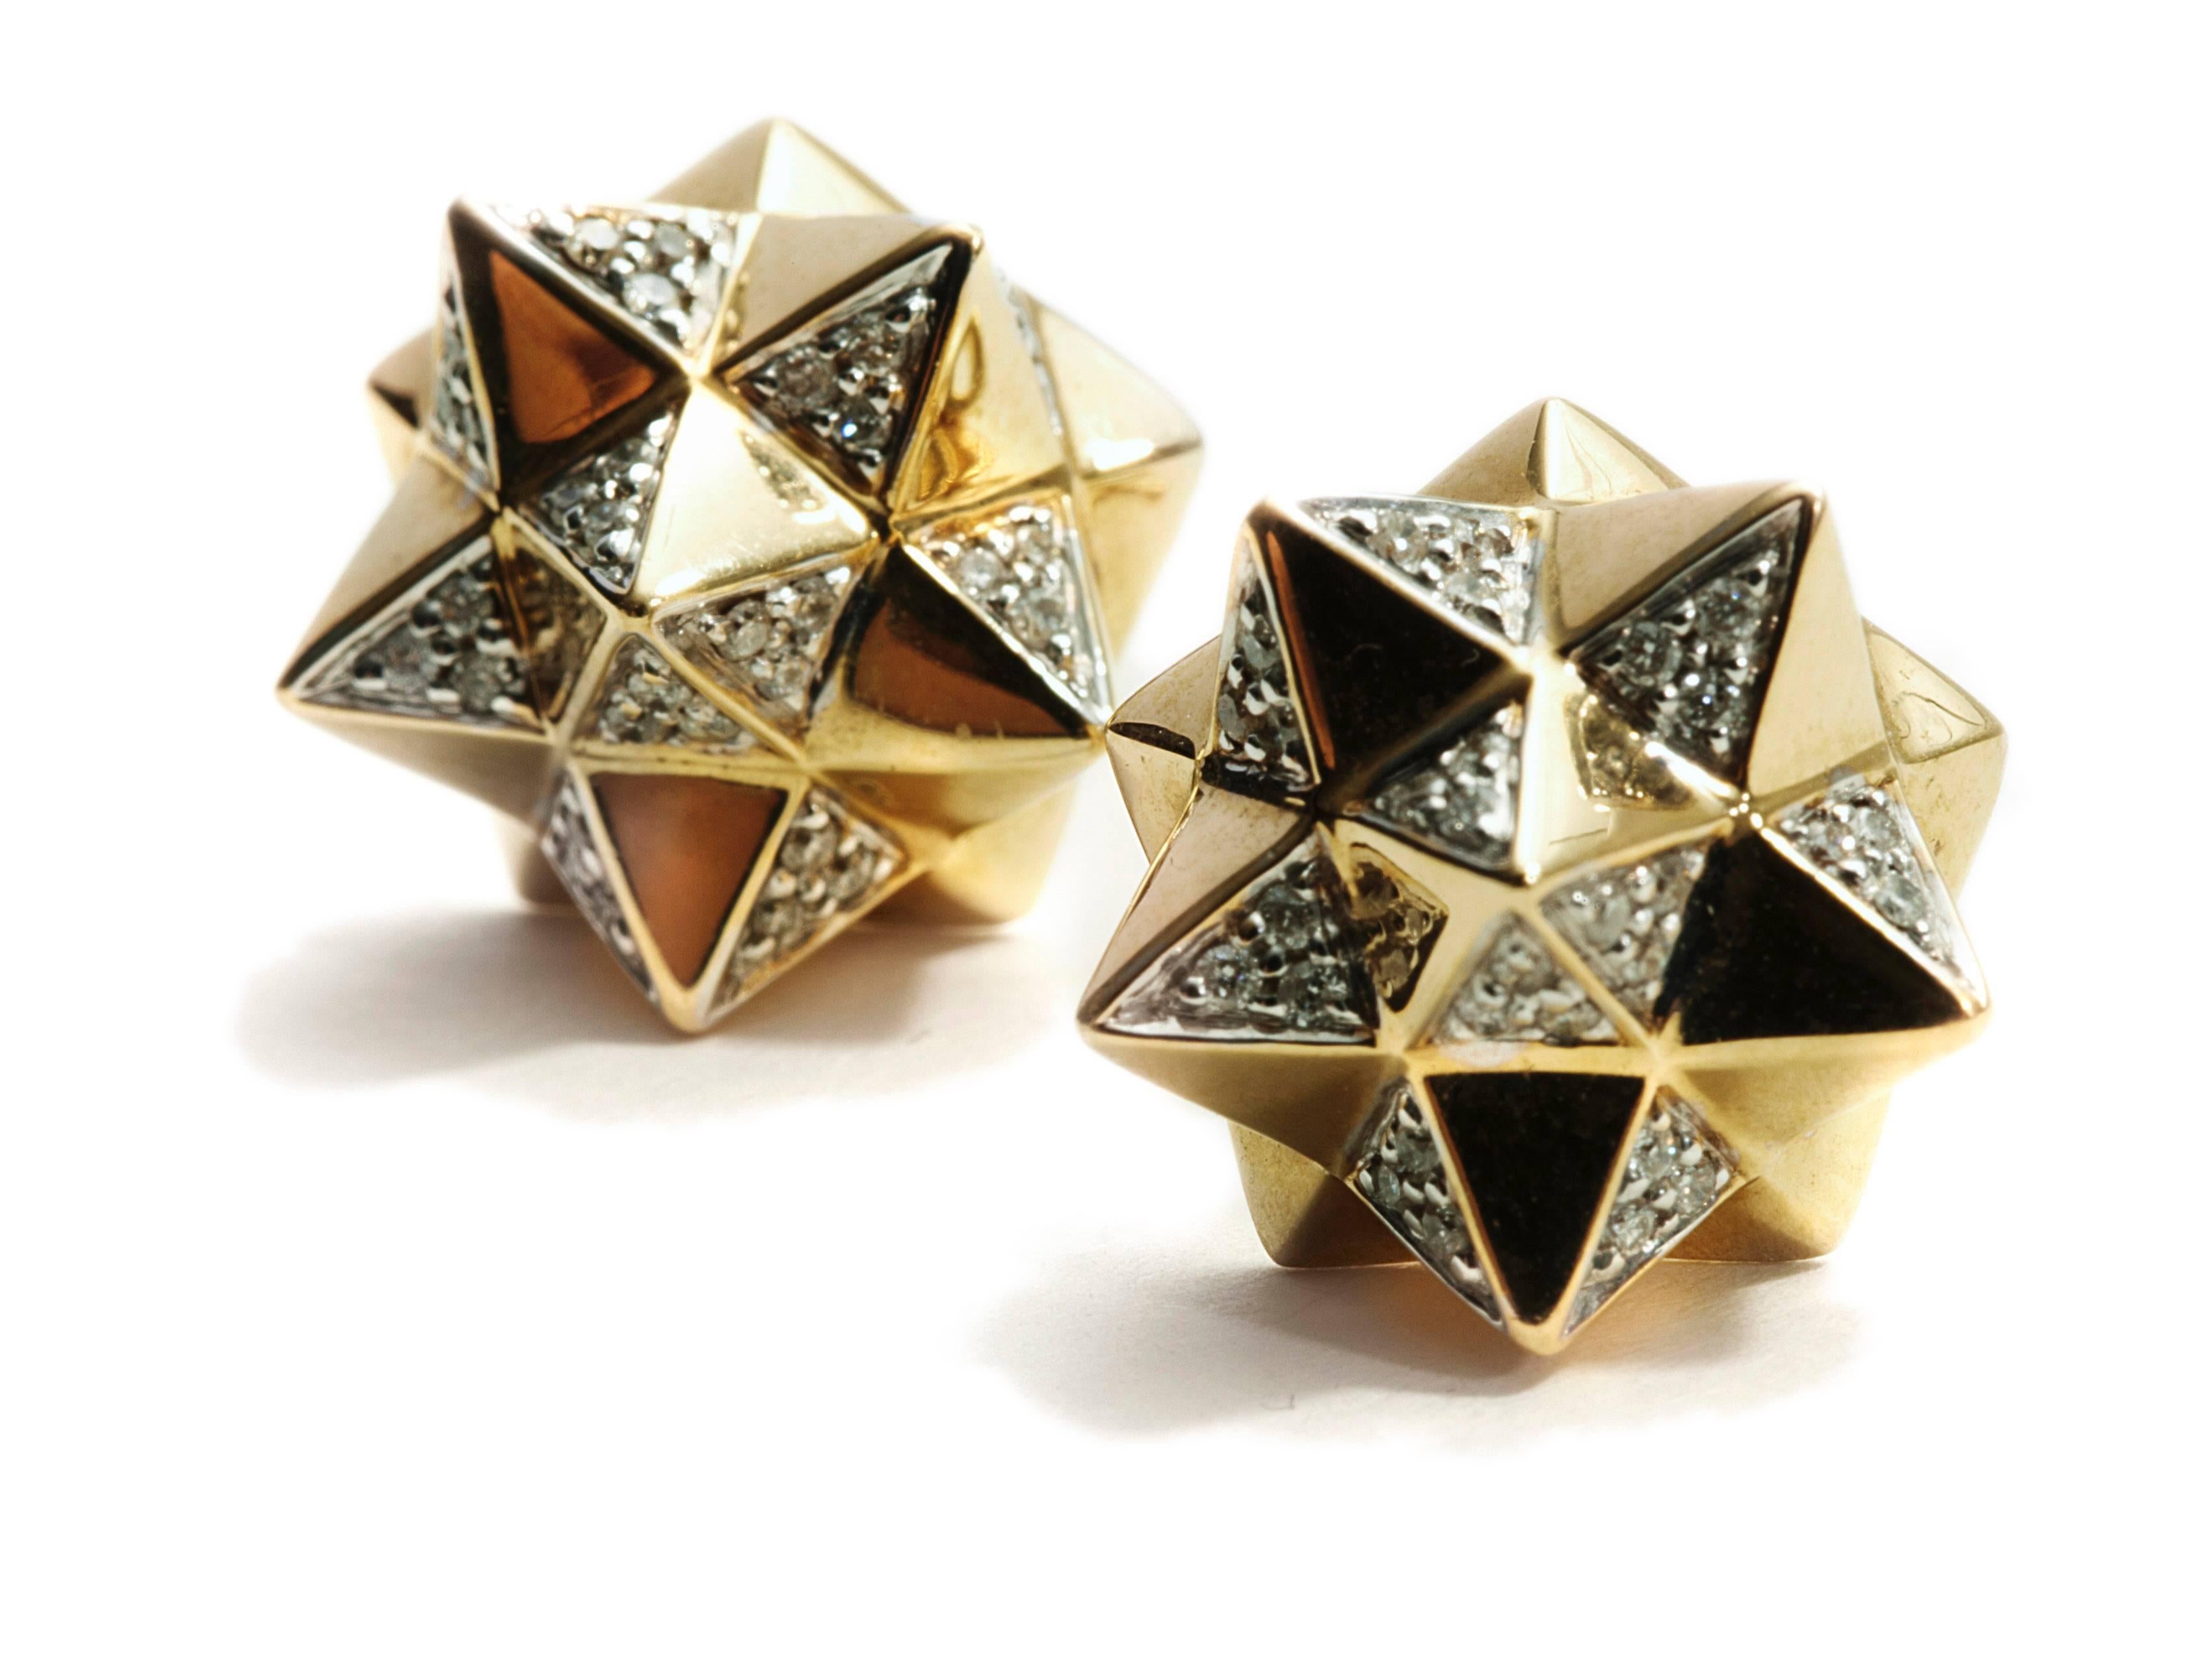 John Brevard Tetra Diamond Gold Stud Earrings In New Condition For Sale In Coral Gables, FL